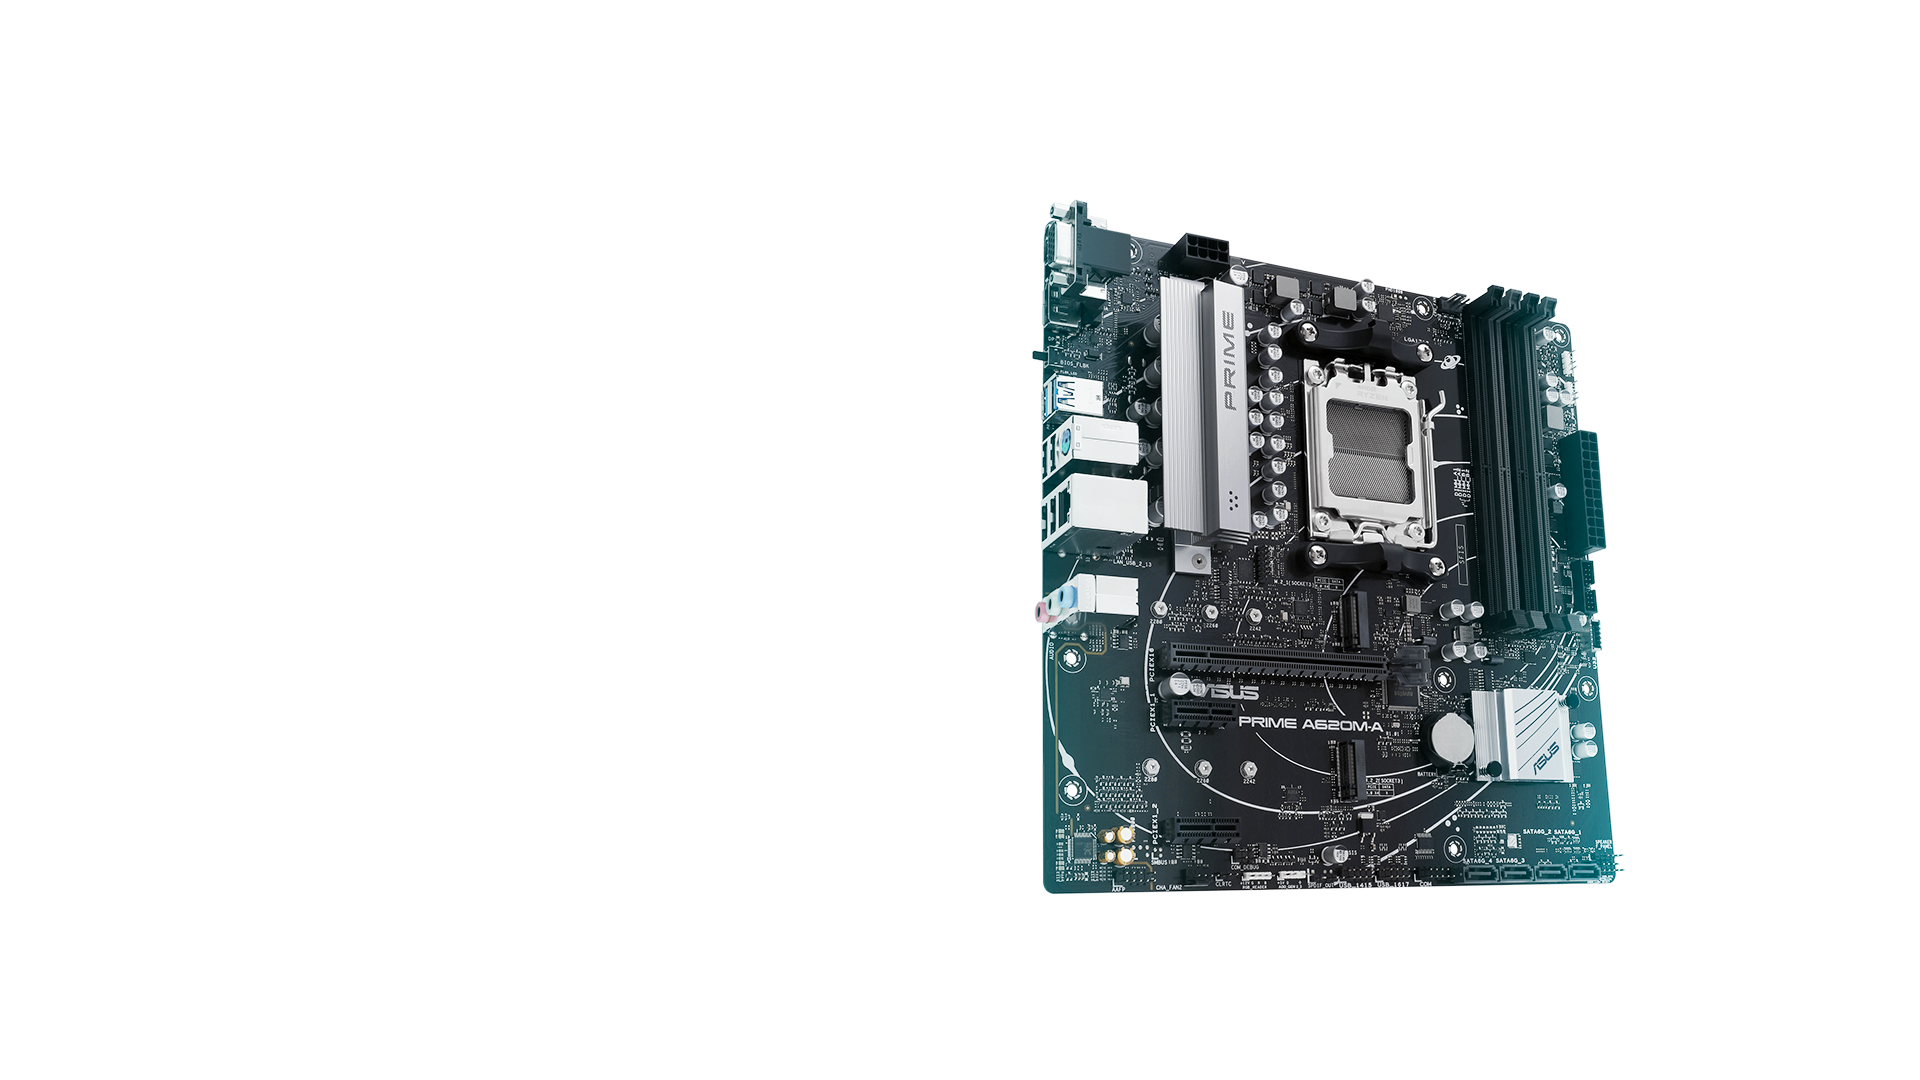 Prime series motherboard provides users and PC DIY builders a range of performance tuning options via intuitive software and firmware features.